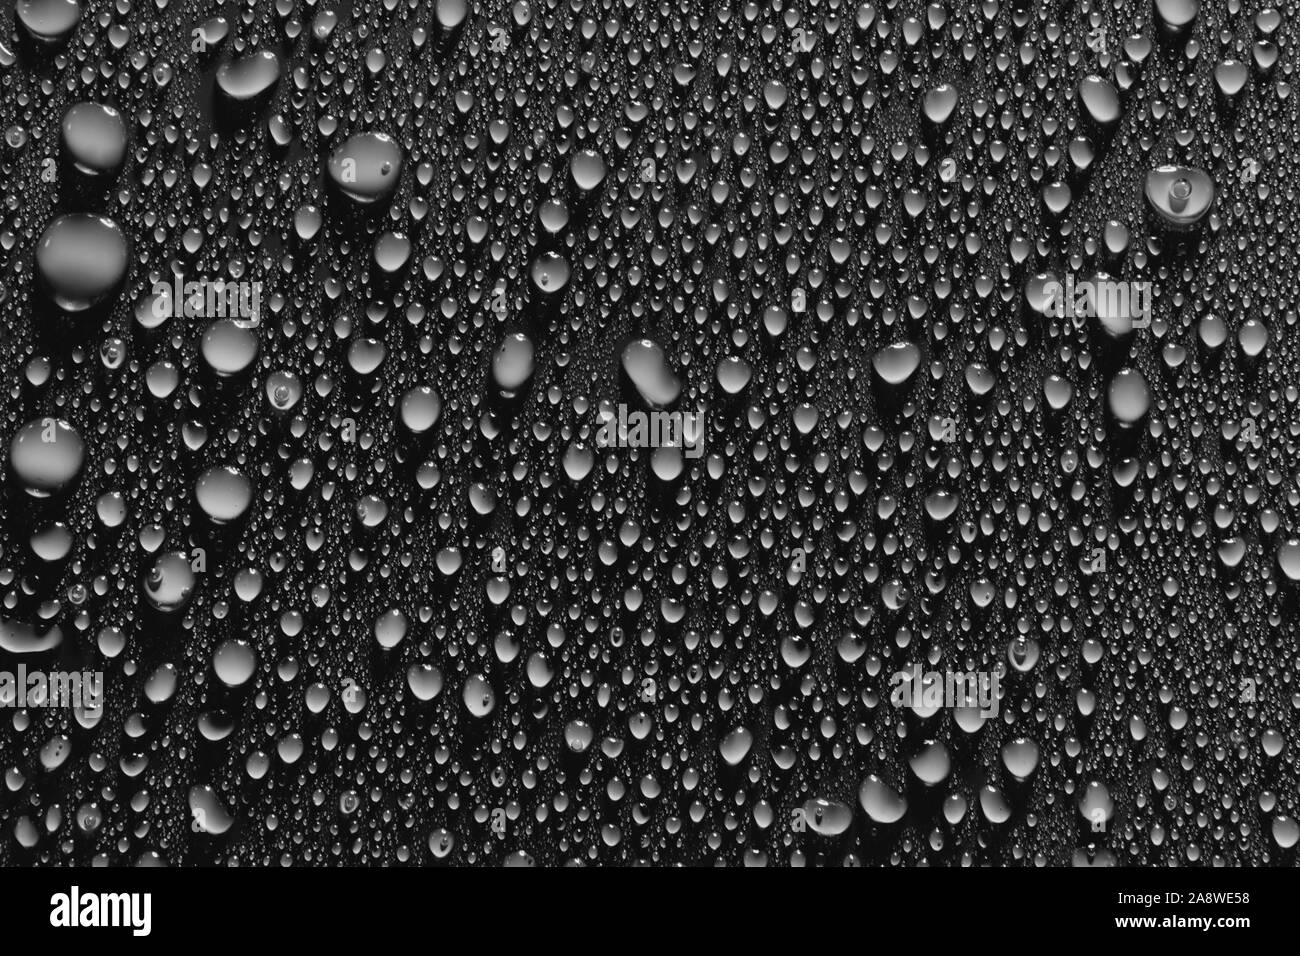 Water Drops On Smooth Surface Black Background Stock Photo Alamy